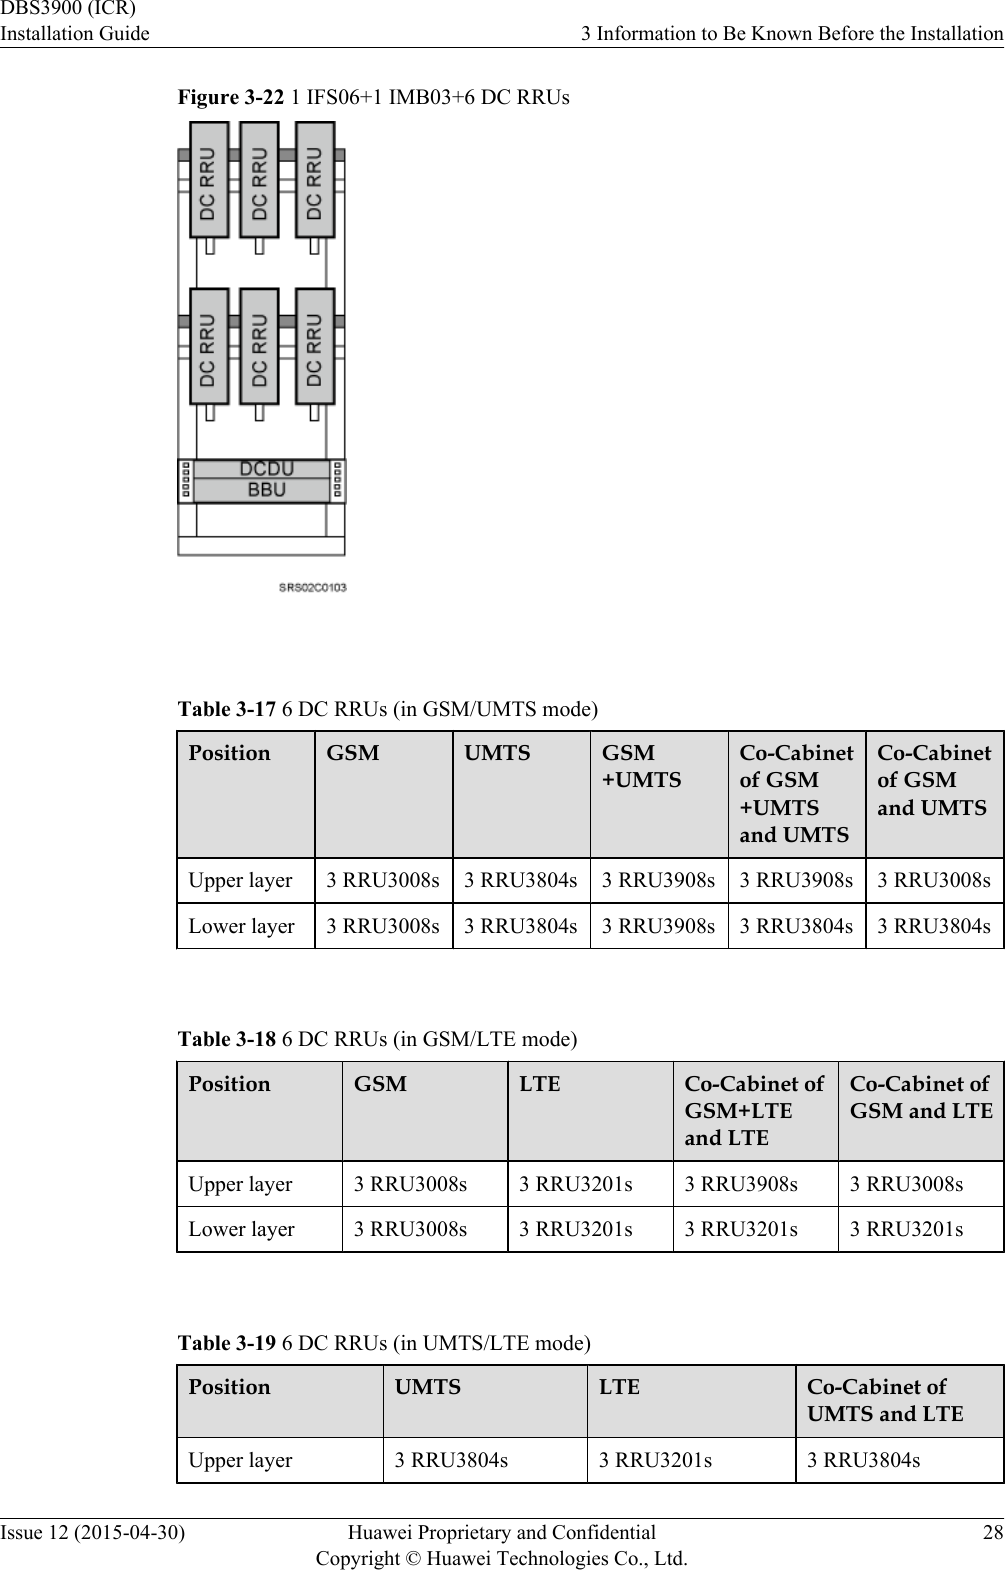 Figure 3-22 1 IFS06+1 IMB03+6 DC RRUs Table 3-17 6 DC RRUs (in GSM/UMTS mode)Position GSM UMTS GSM+UMTSCo-Cabinetof GSM+UMTSand UMTSCo-Cabinetof GSMand UMTSUpper layer 3 RRU3008s 3 RRU3804s 3 RRU3908s 3 RRU3908s 3 RRU3008sLower layer 3 RRU3008s 3 RRU3804s 3 RRU3908s 3 RRU3804s 3 RRU3804s Table 3-18 6 DC RRUs (in GSM/LTE mode)Position GSM LTE Co-Cabinet ofGSM+LTEand LTECo-Cabinet ofGSM and LTEUpper layer 3 RRU3008s 3 RRU3201s 3 RRU3908s 3 RRU3008sLower layer 3 RRU3008s 3 RRU3201s 3 RRU3201s 3 RRU3201s Table 3-19 6 DC RRUs (in UMTS/LTE mode)Position UMTS LTE Co-Cabinet ofUMTS and LTEUpper layer 3 RRU3804s 3 RRU3201s 3 RRU3804sDBS3900 (ICR)Installation Guide 3 Information to Be Known Before the InstallationIssue 12 (2015-04-30) Huawei Proprietary and ConfidentialCopyright © Huawei Technologies Co., Ltd.28